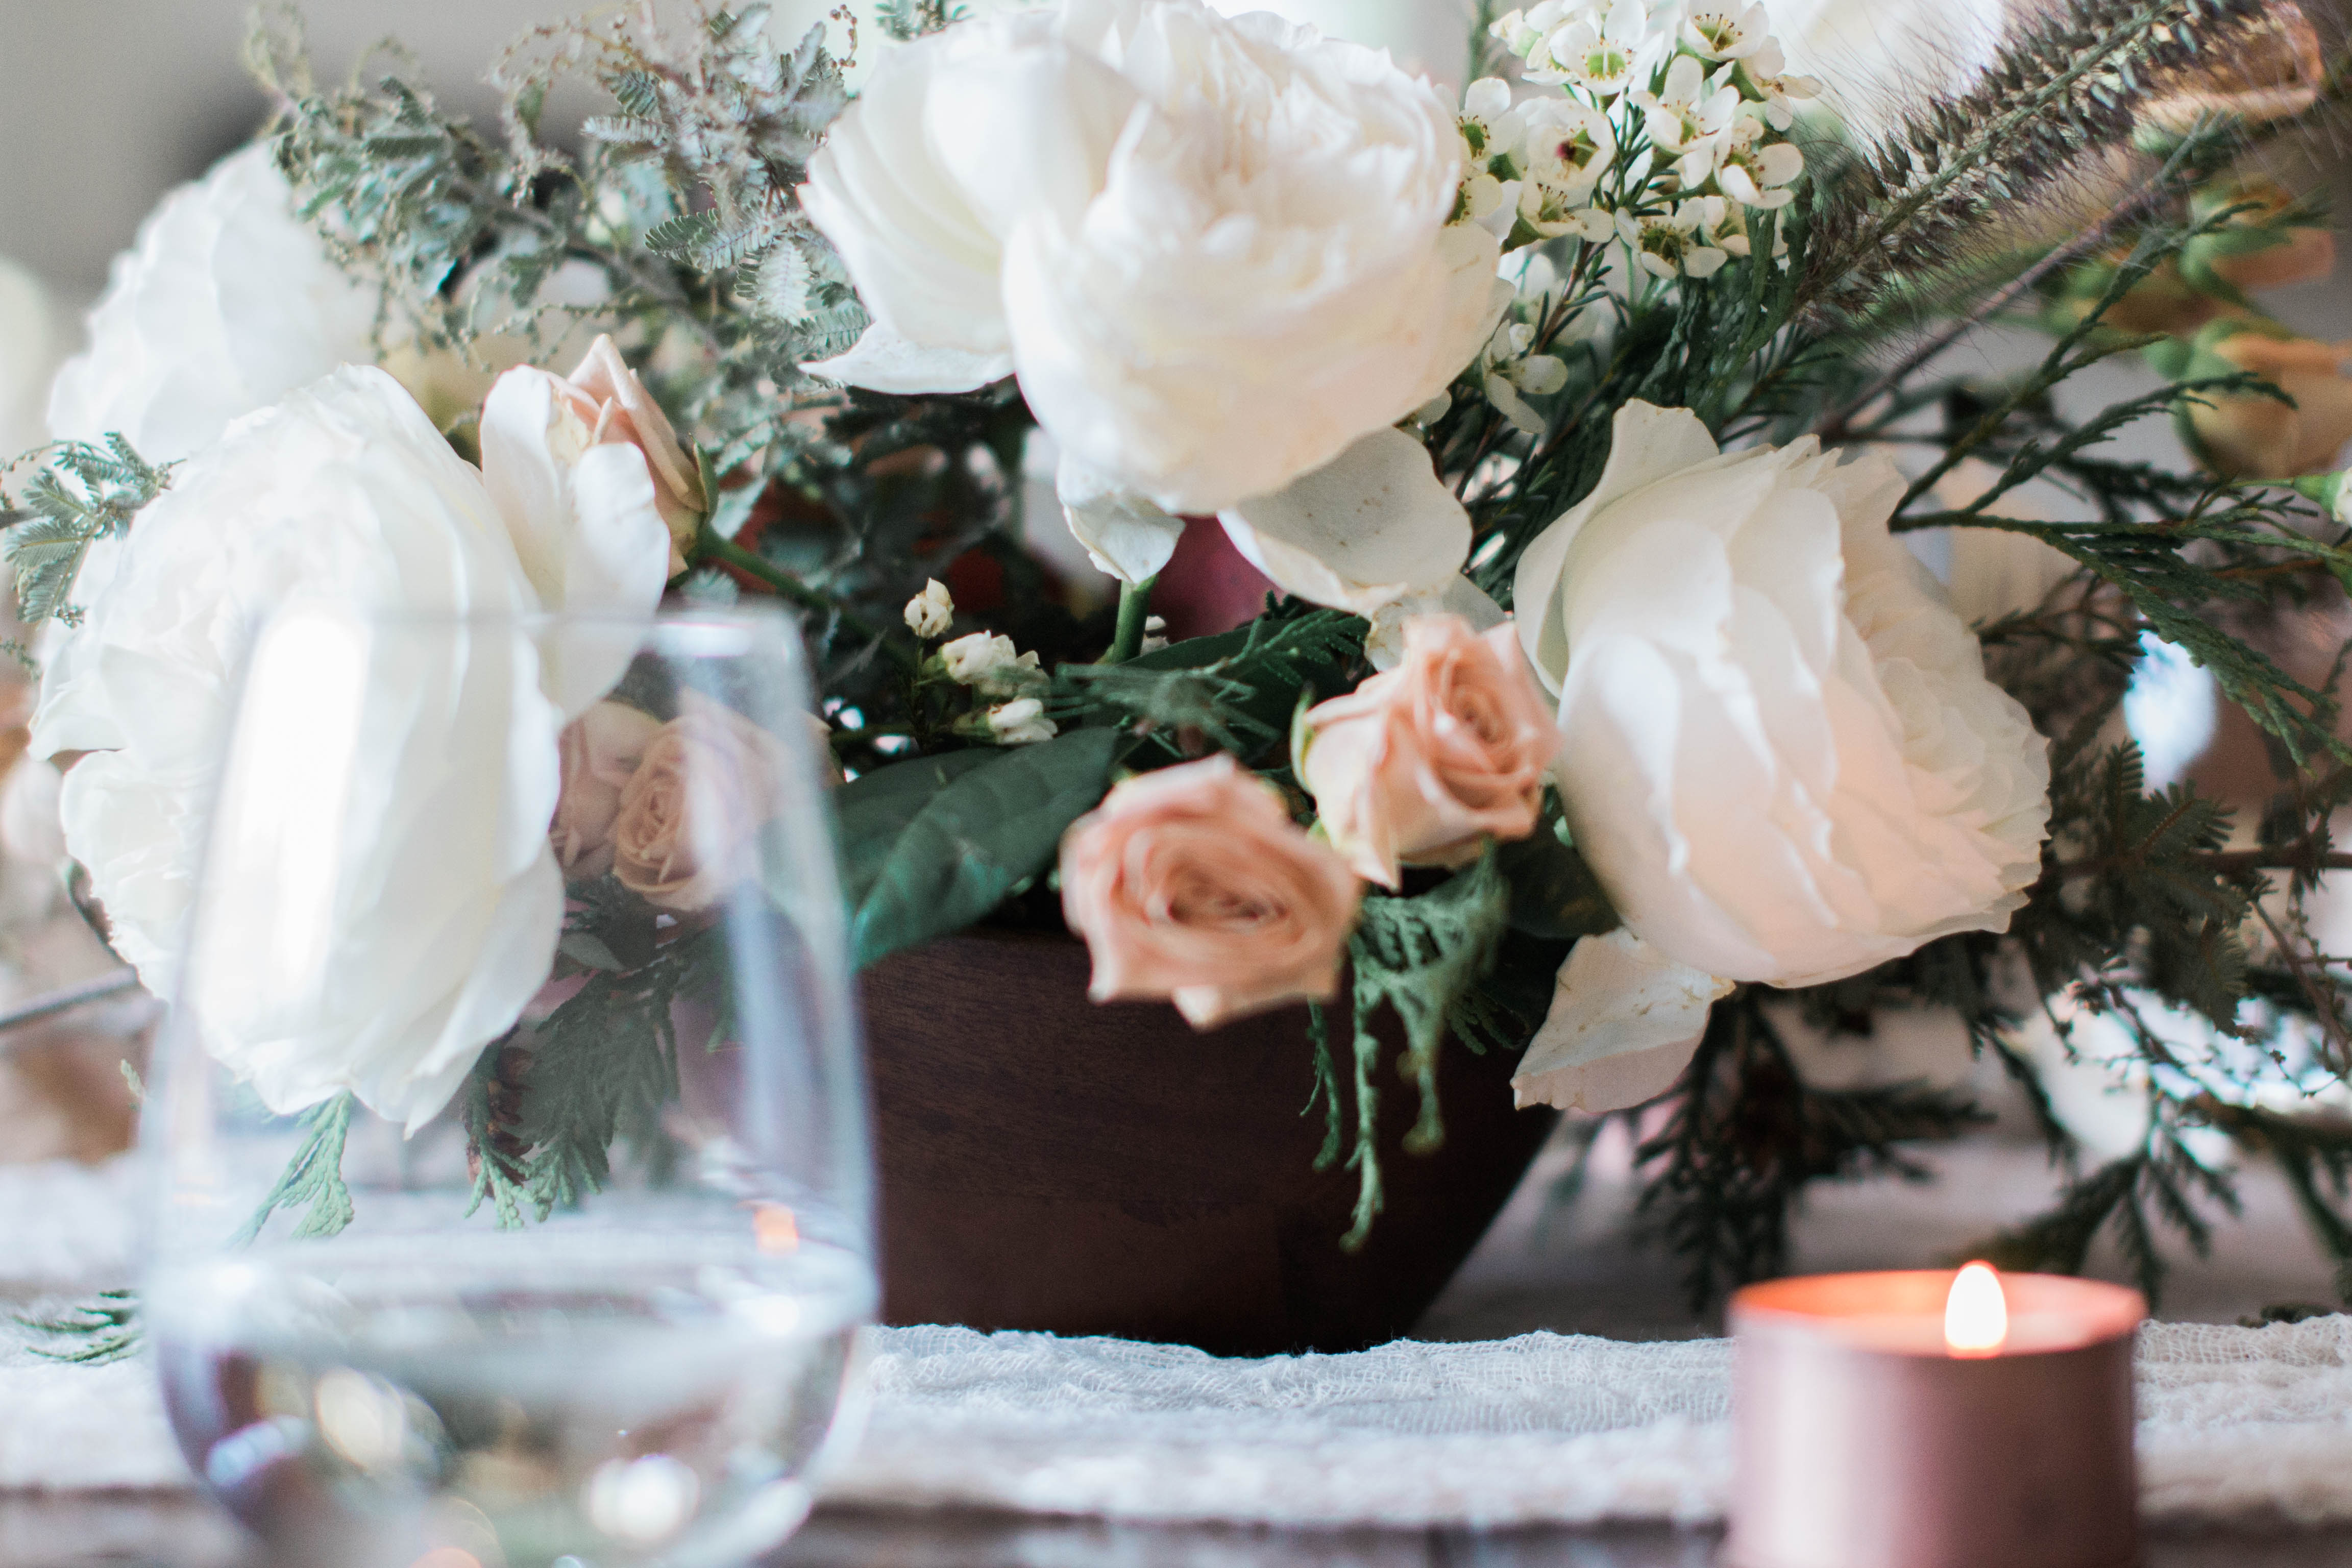 Dinner Party Decor | The Day's Design